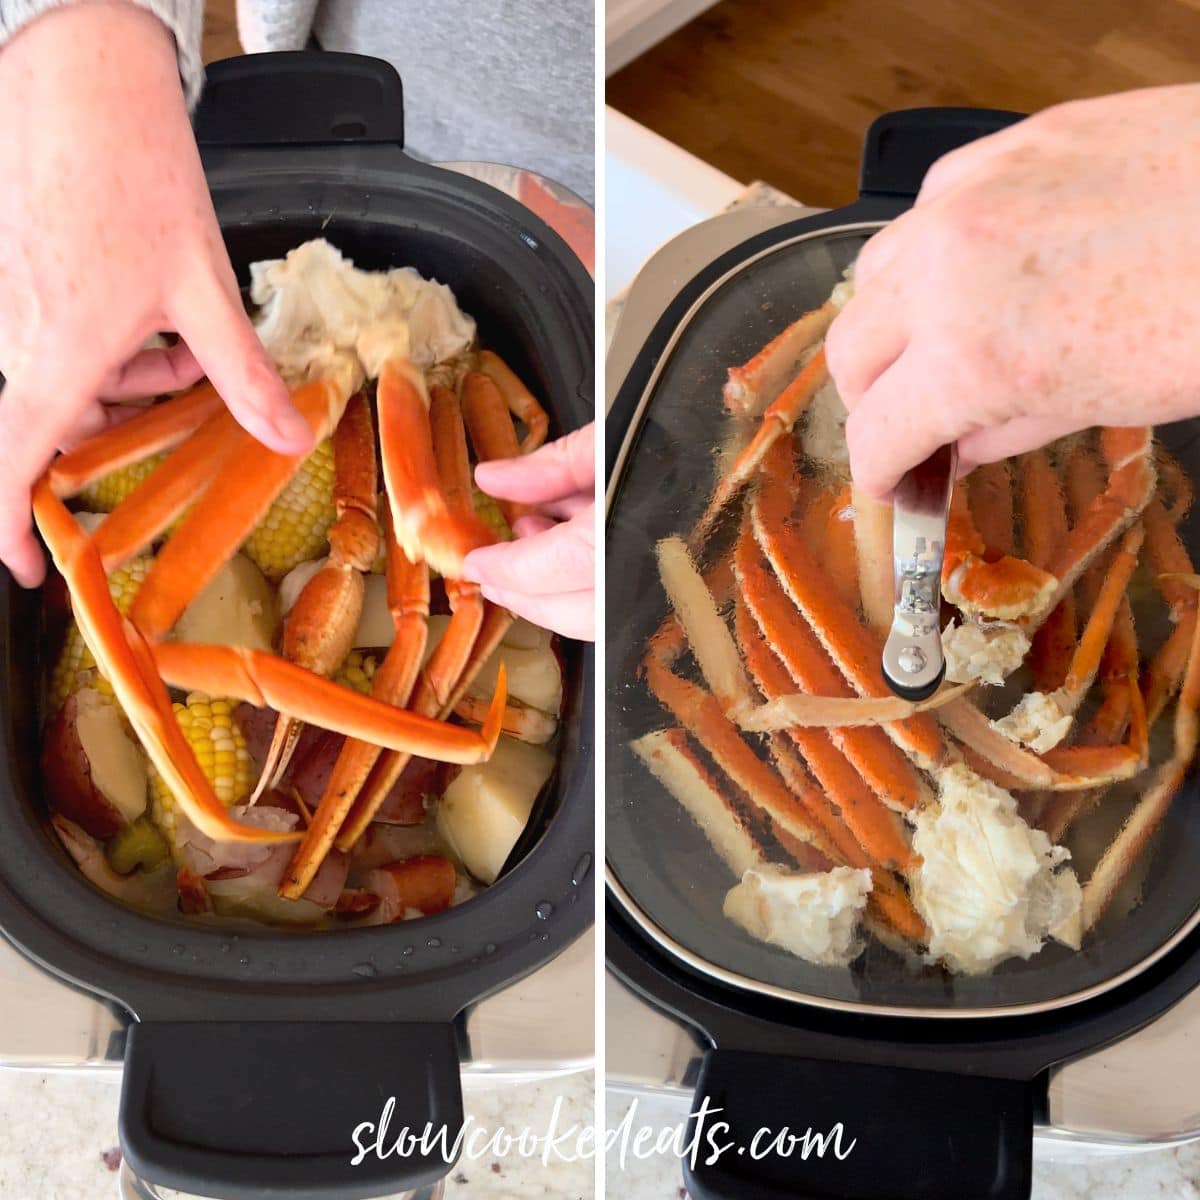 Adding crab legs to the top of the seafood boil then covering with a lid.